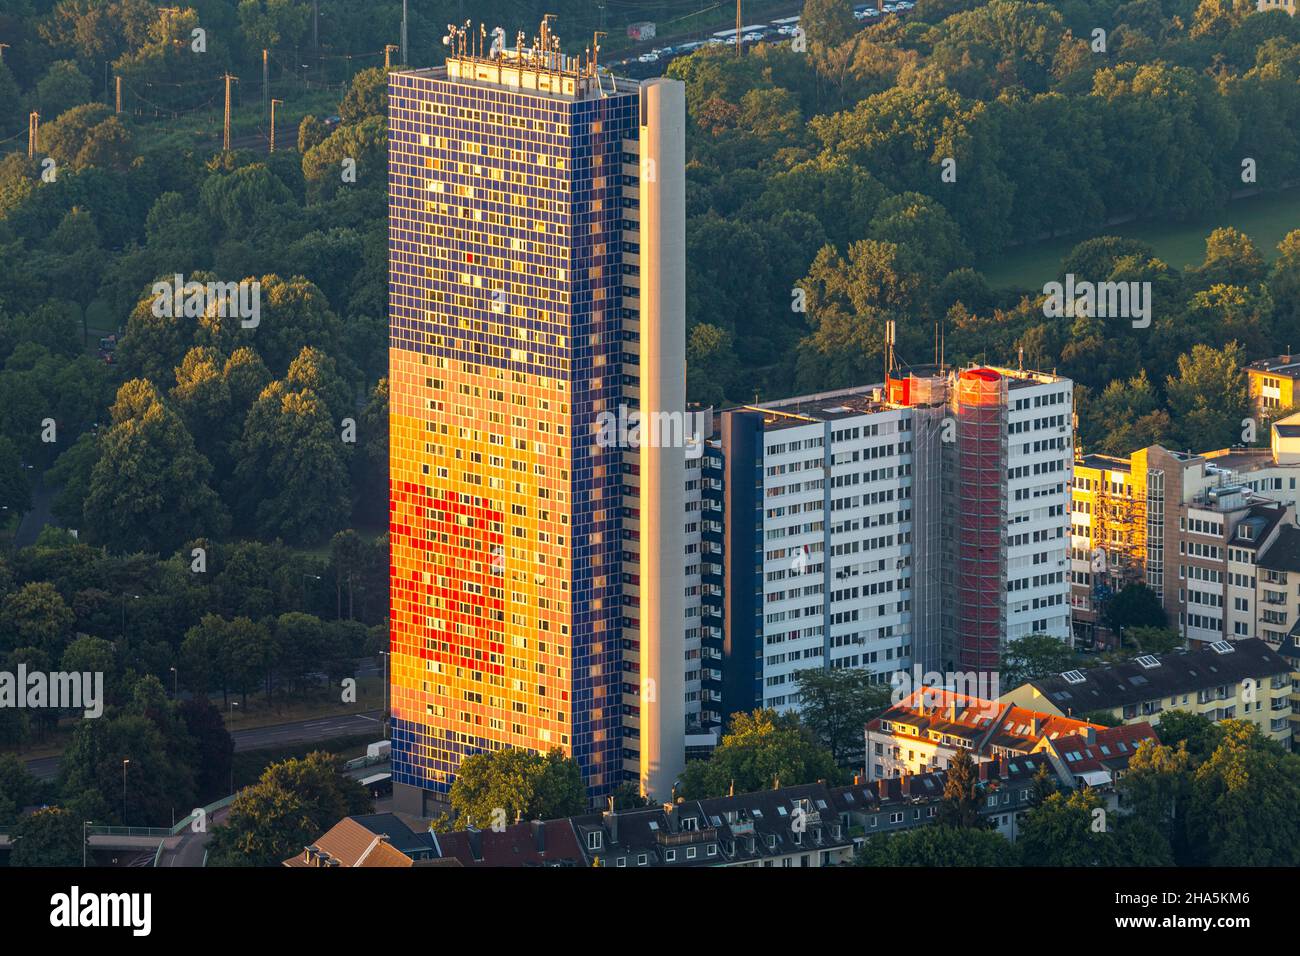 the herkules hochhaus - captured via zeppelin in the early morning just after sunrise. cologne,north rhine-westphalia,germany Stock Photo